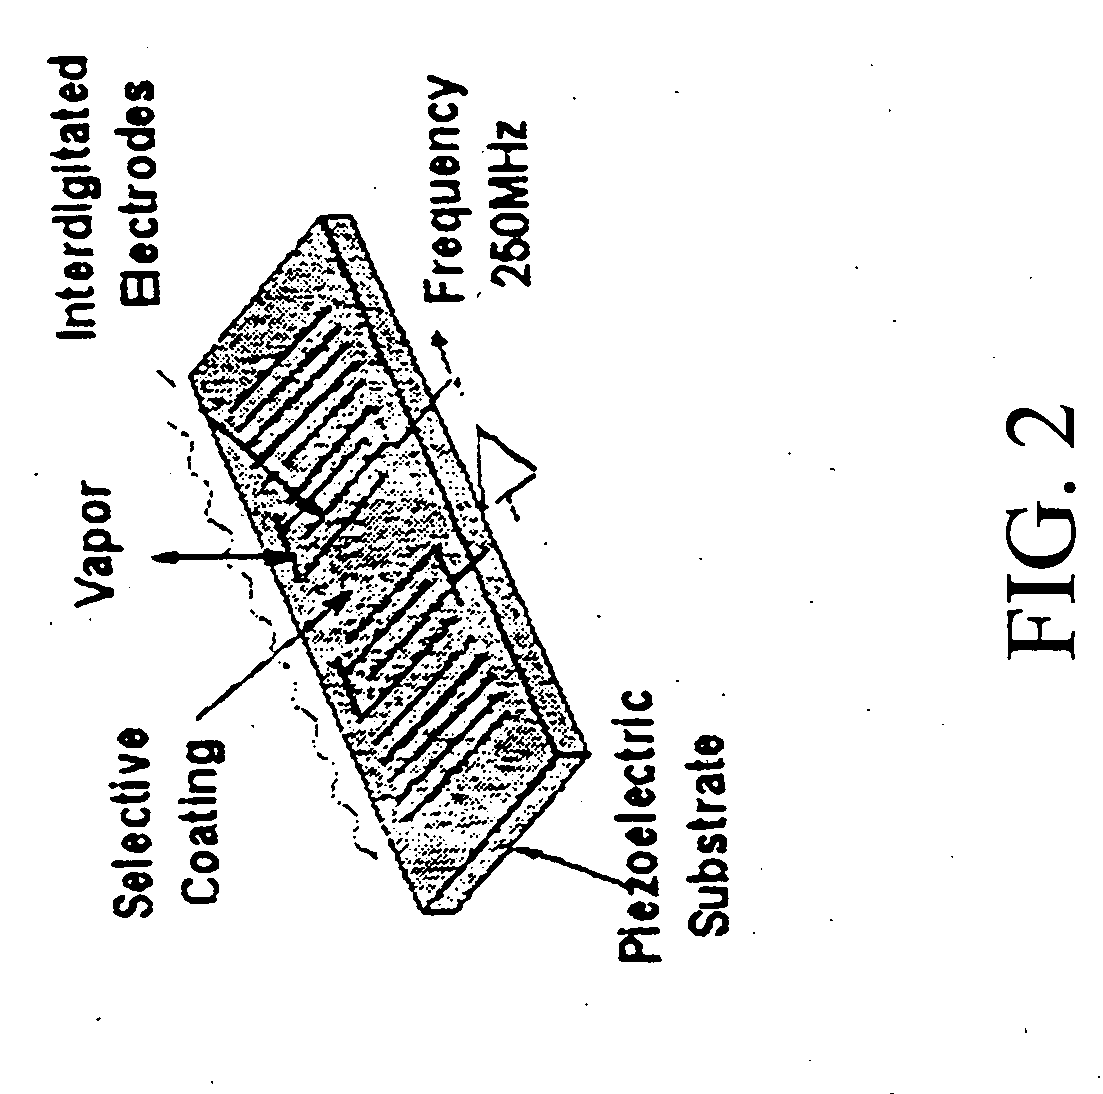 Method and apparatus for detecting humans and human remains